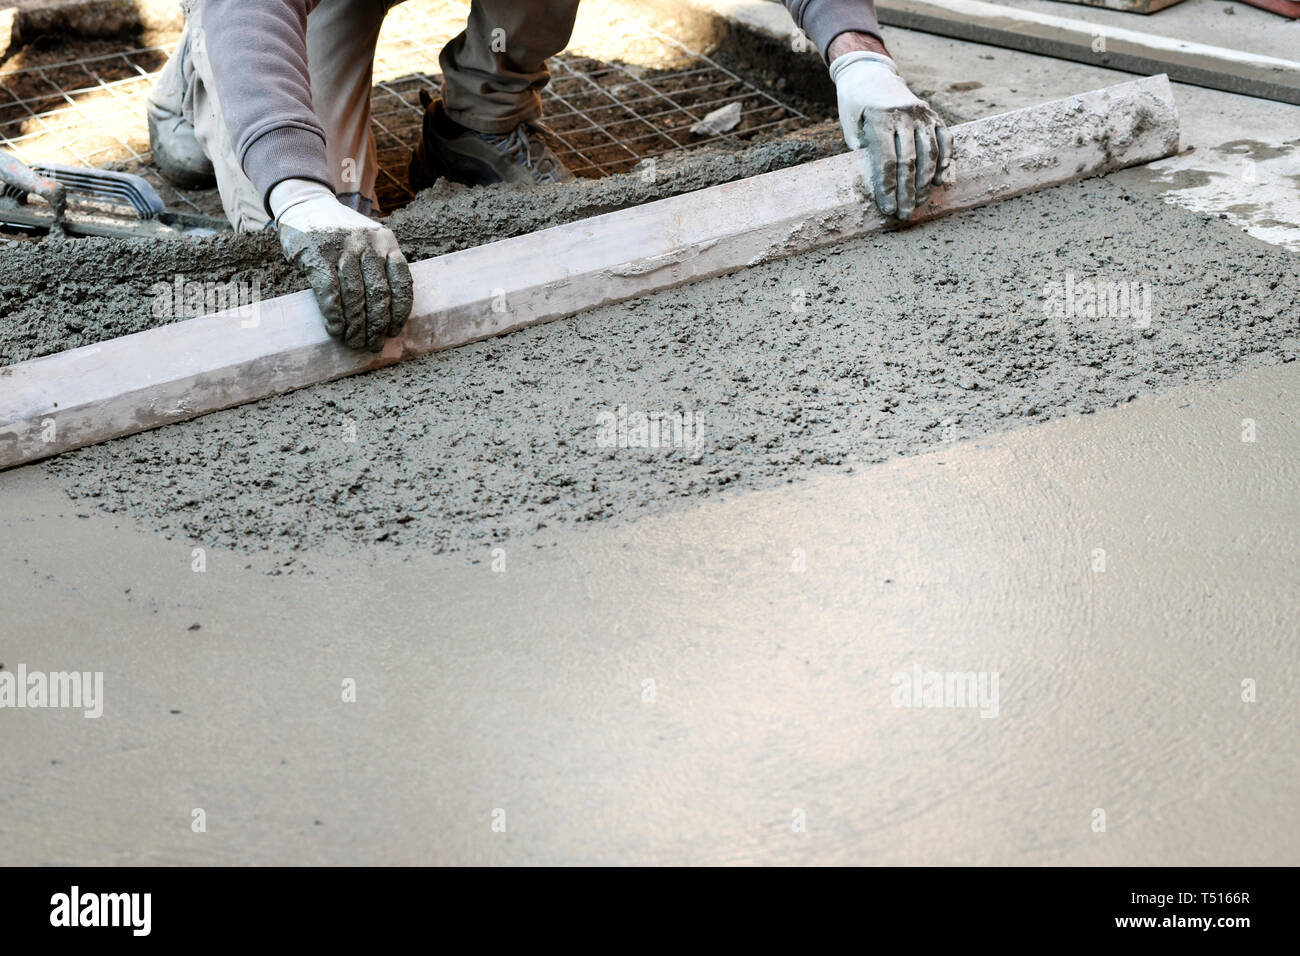 Worker spreading and flattening cement mortar with hand tool, making concrete floor Stock Photo